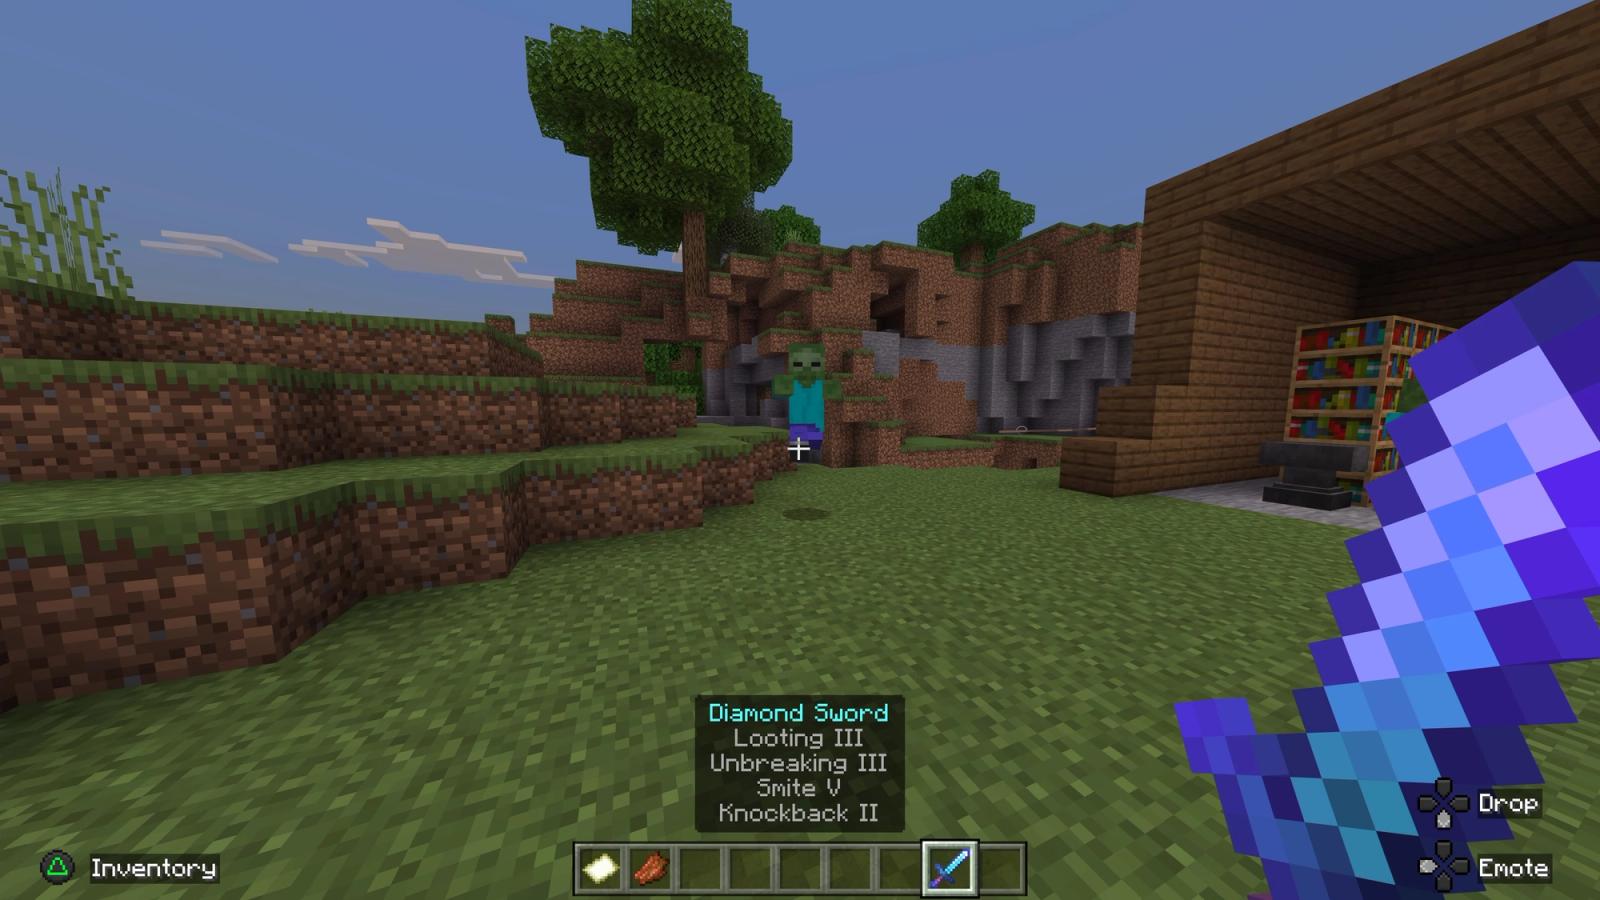 A Minecraft Zombie after being knocked back with a Knockback enchanted sword